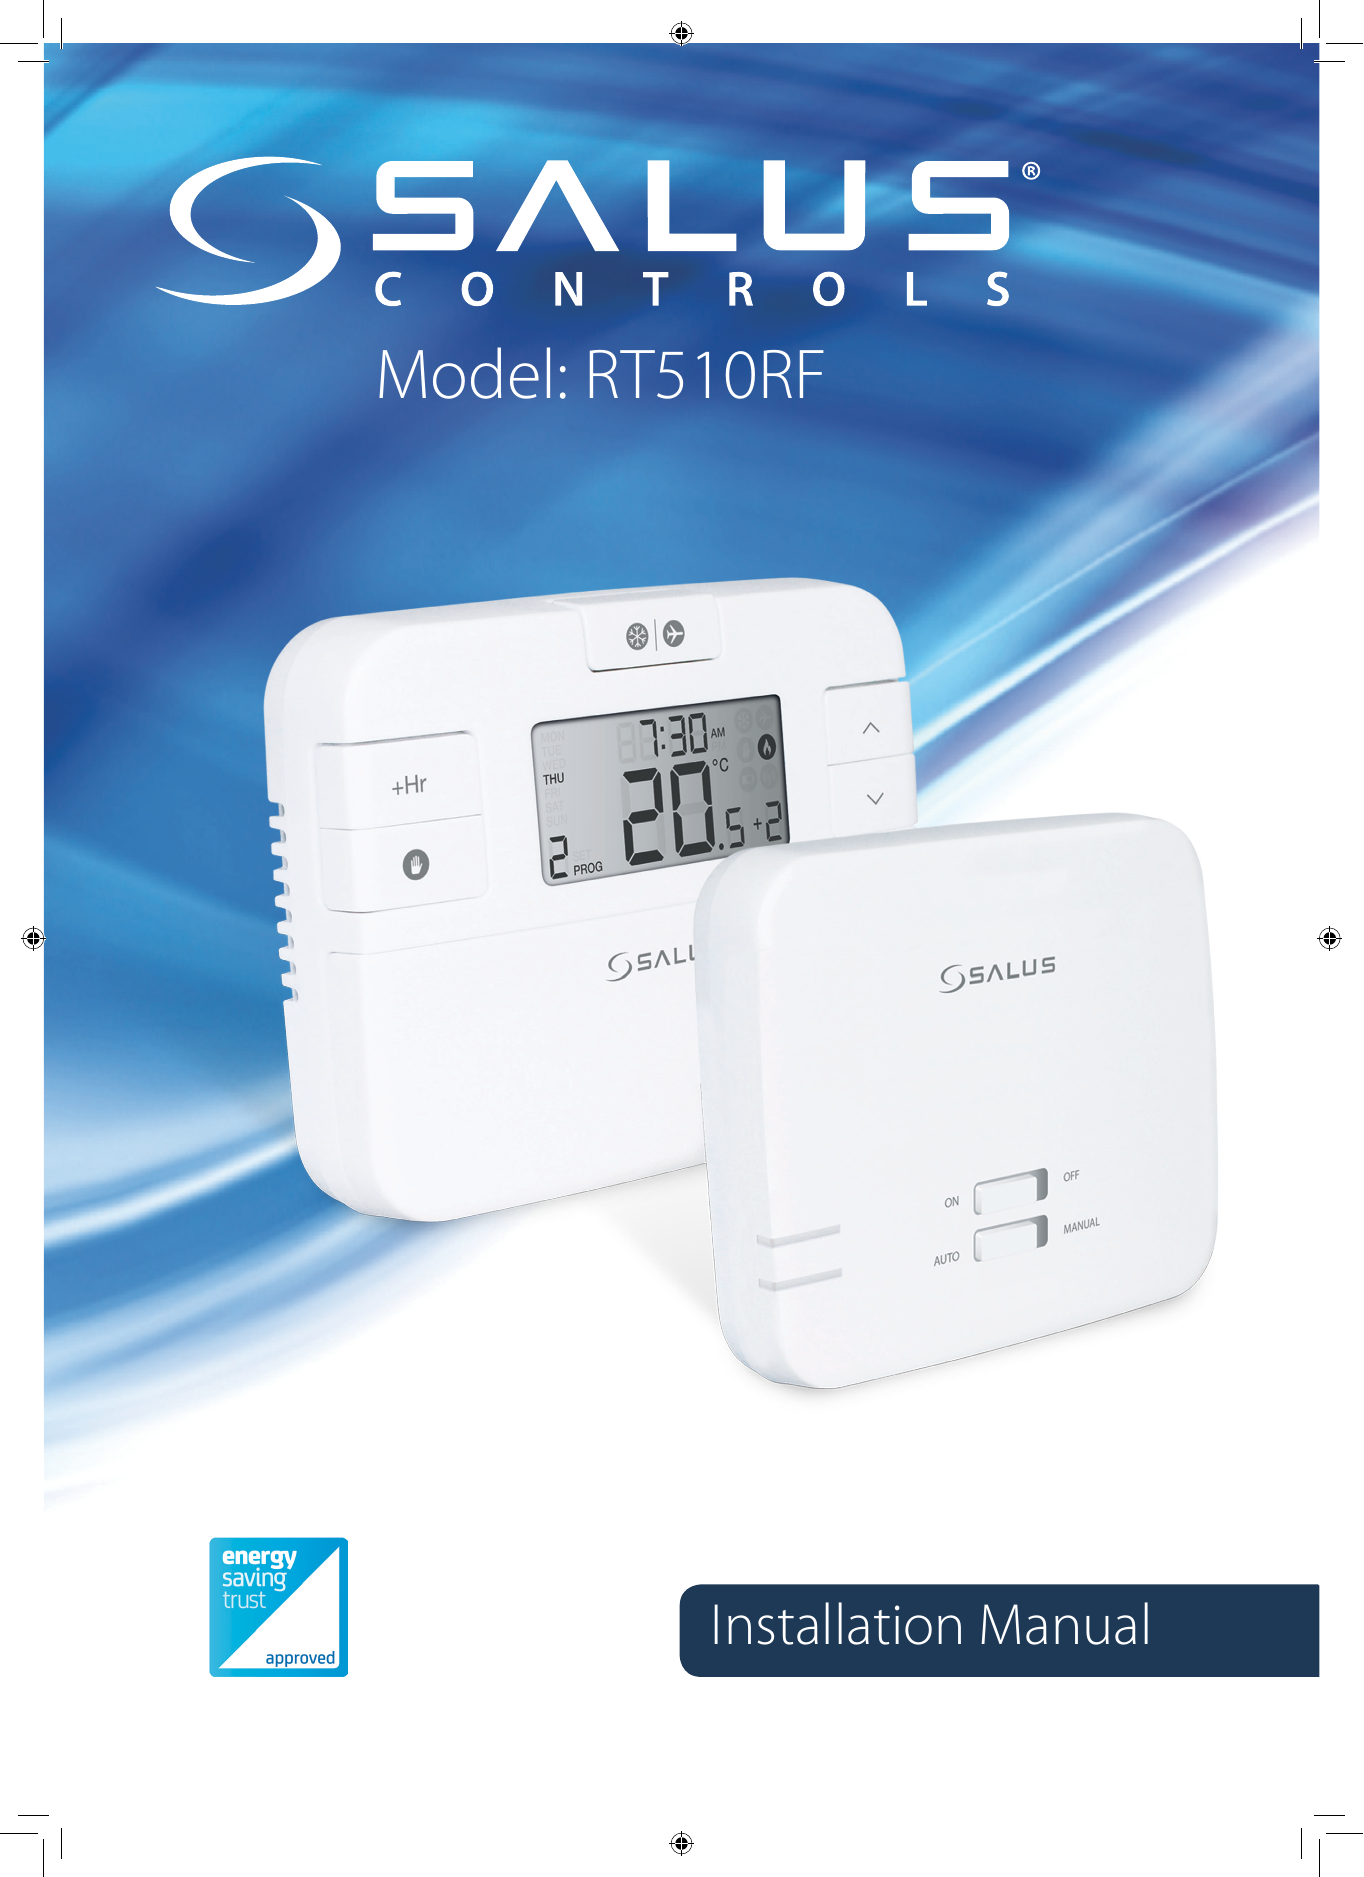 SALUS RT510 DIGITAL 7 DAY PROGRAMMABLE ROOM THERMOSTAT REPLACES RT500 STAT